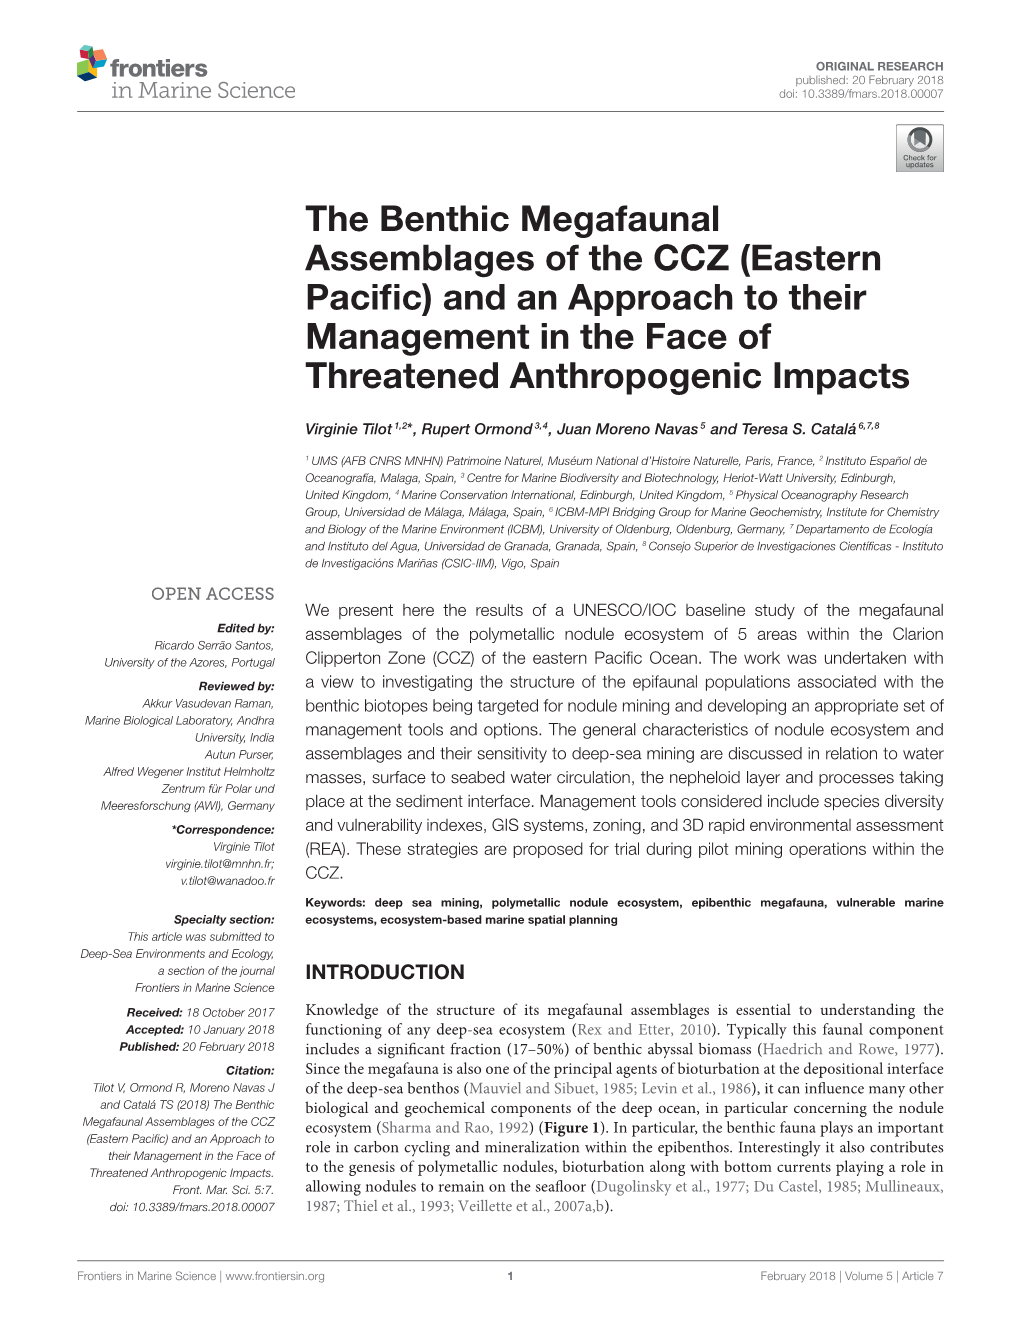 The Benthic Megafaunal Assemblages of the CCZ (Eastern Paciﬁc) and an Approach to Their Management in the Face of Threatened Anthropogenic Impacts